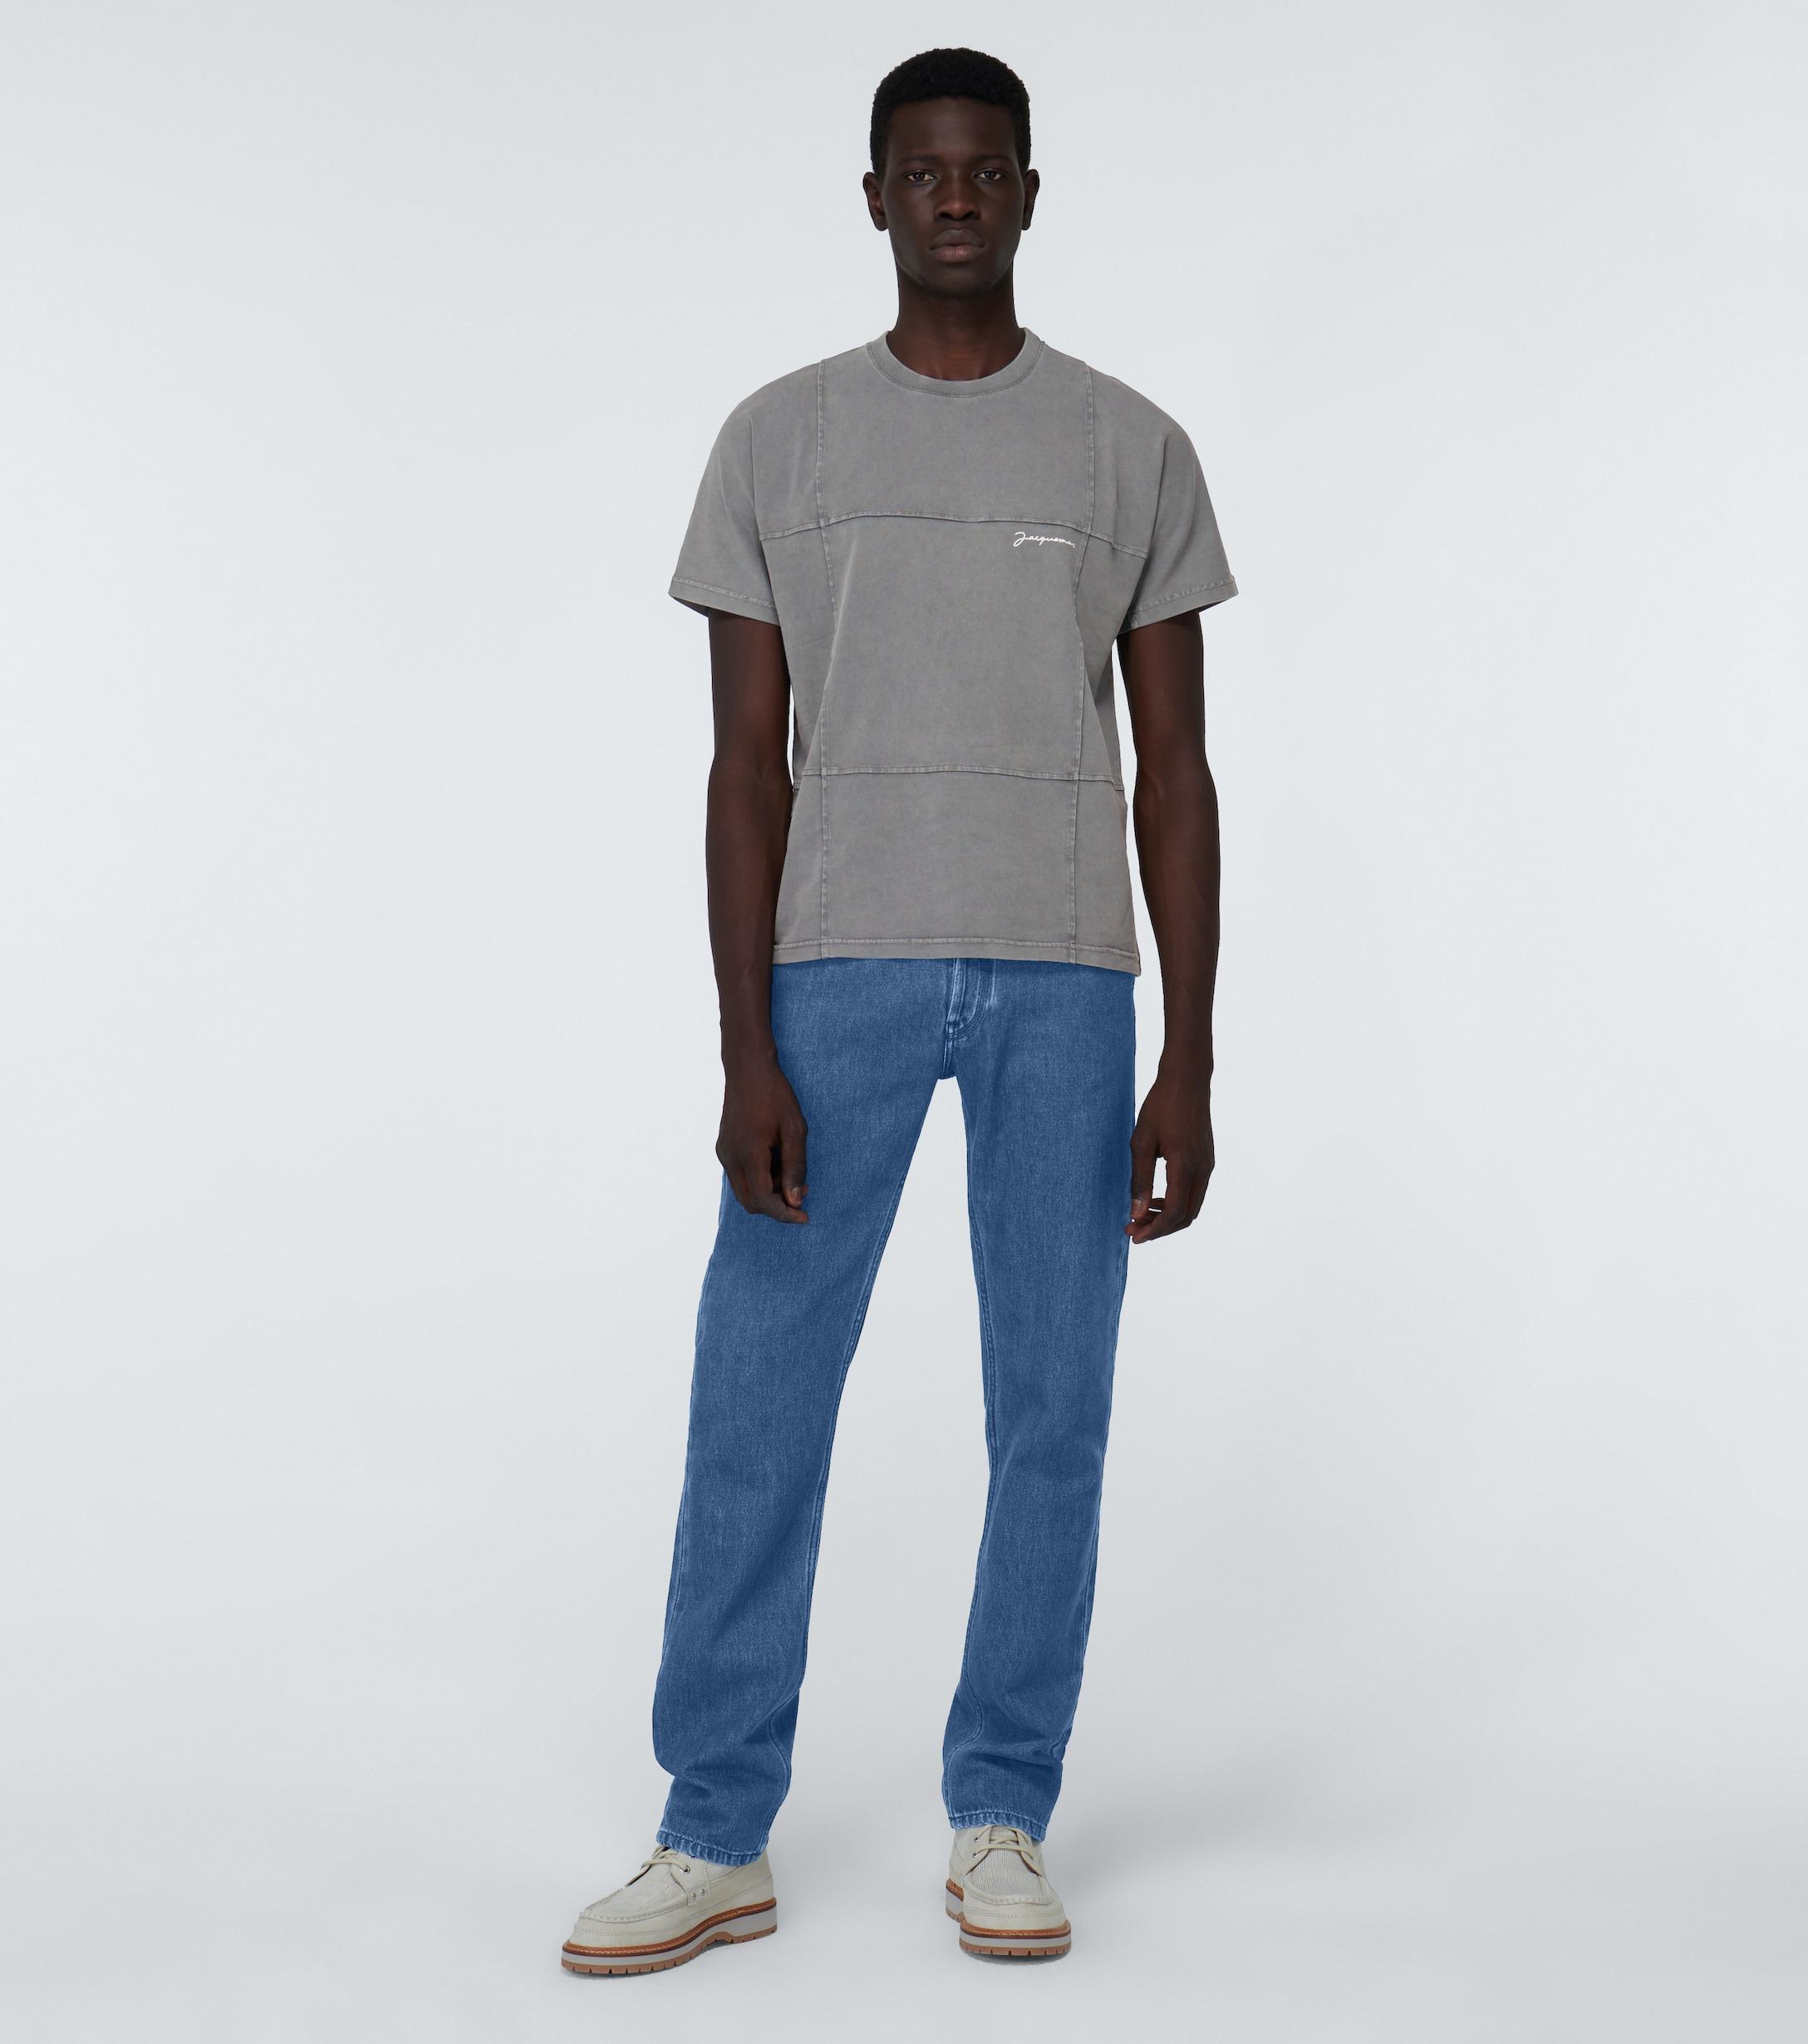 Jacquemus Le T-shirt Carro Top in Grey (Gray) for Men - Lyst